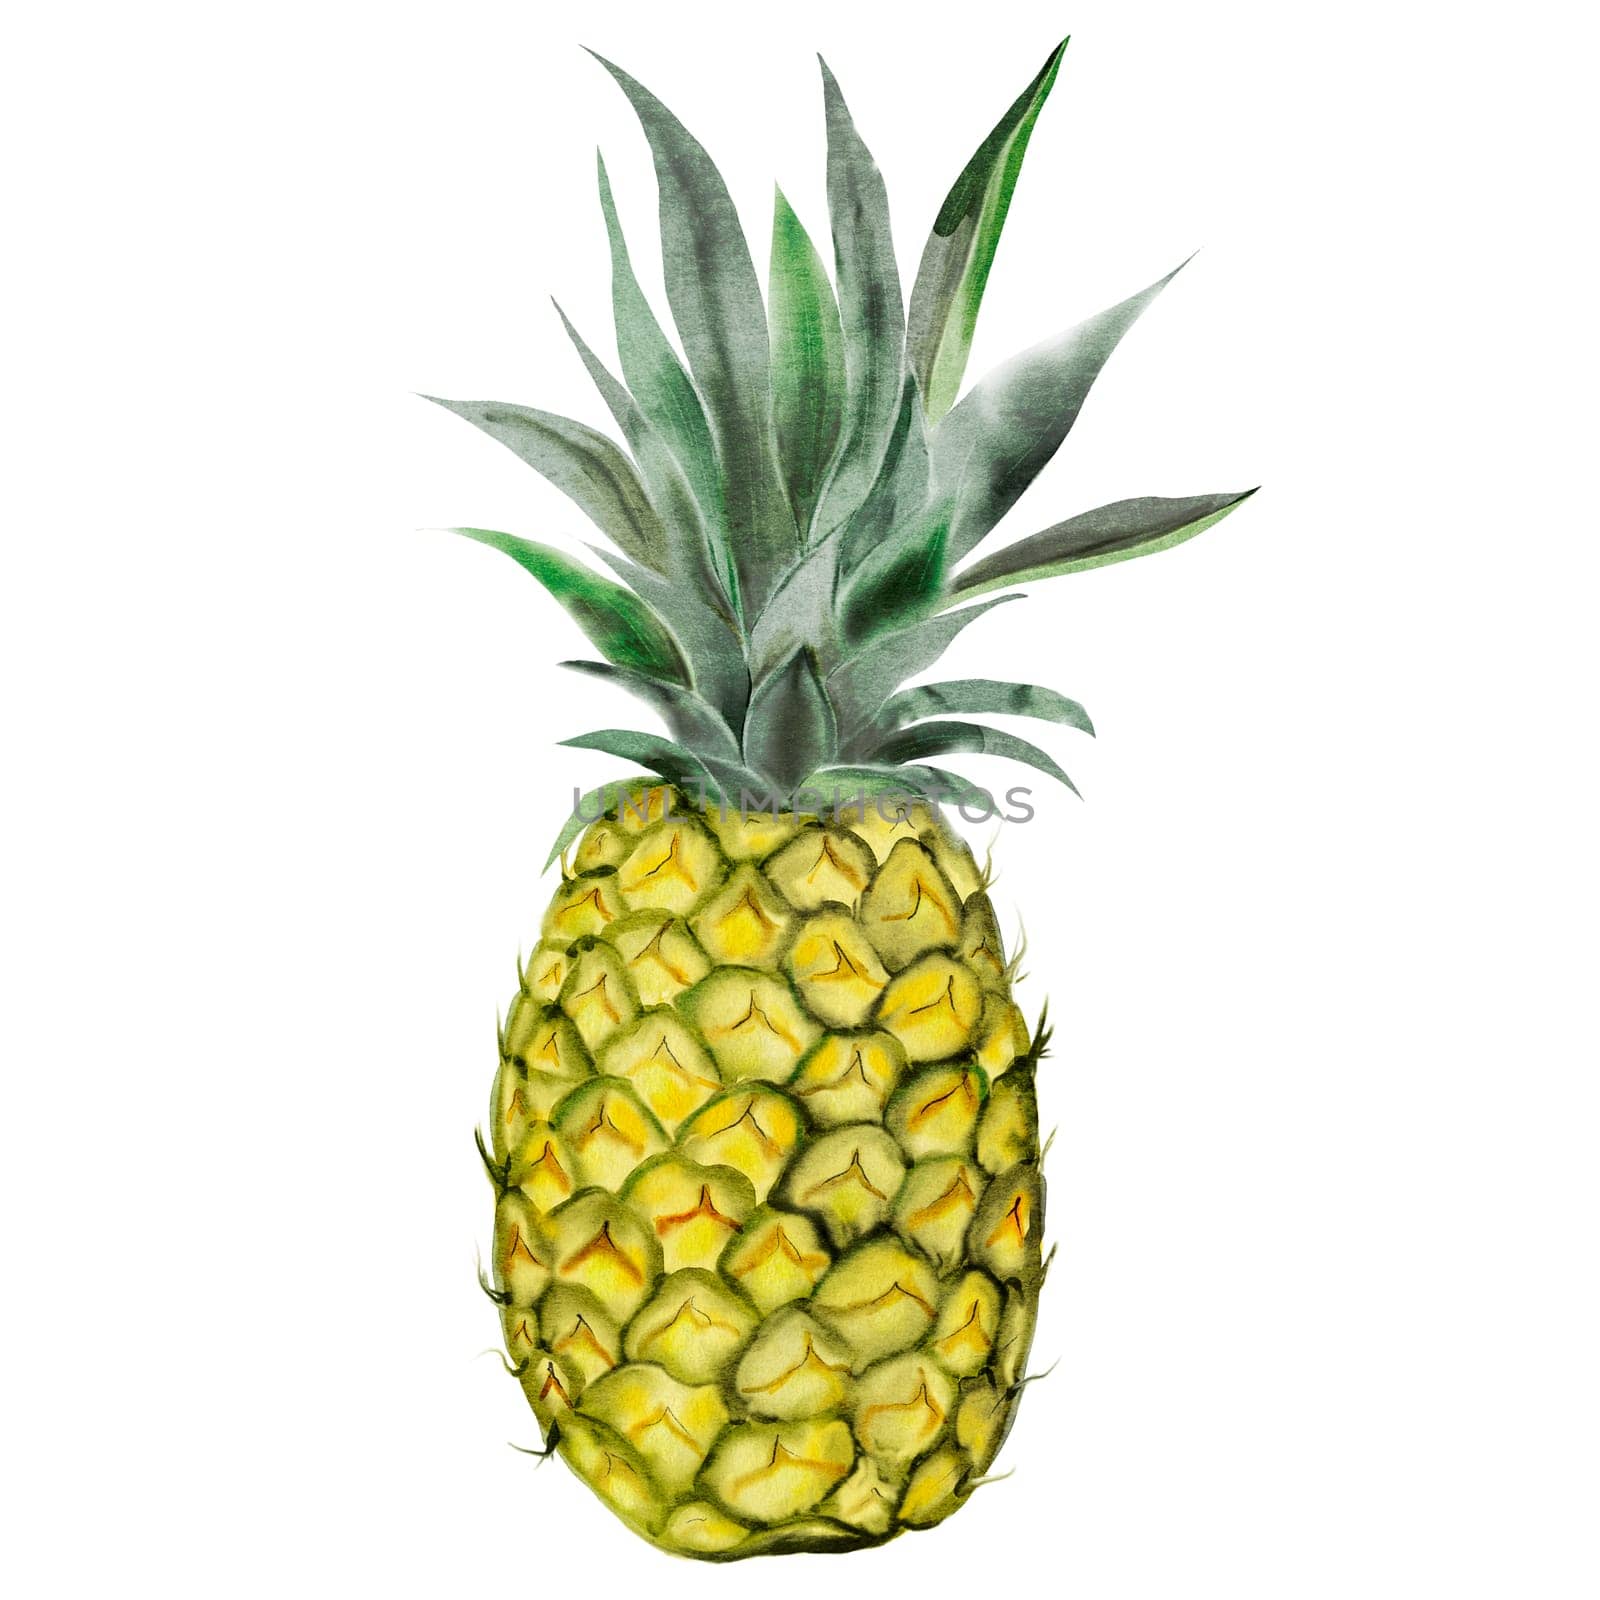 Pineapple watercolor. Whole tropical fruit on isolated white background. Exotic food illustration for menu design, tags and cosmetics packaging. High quality illustration